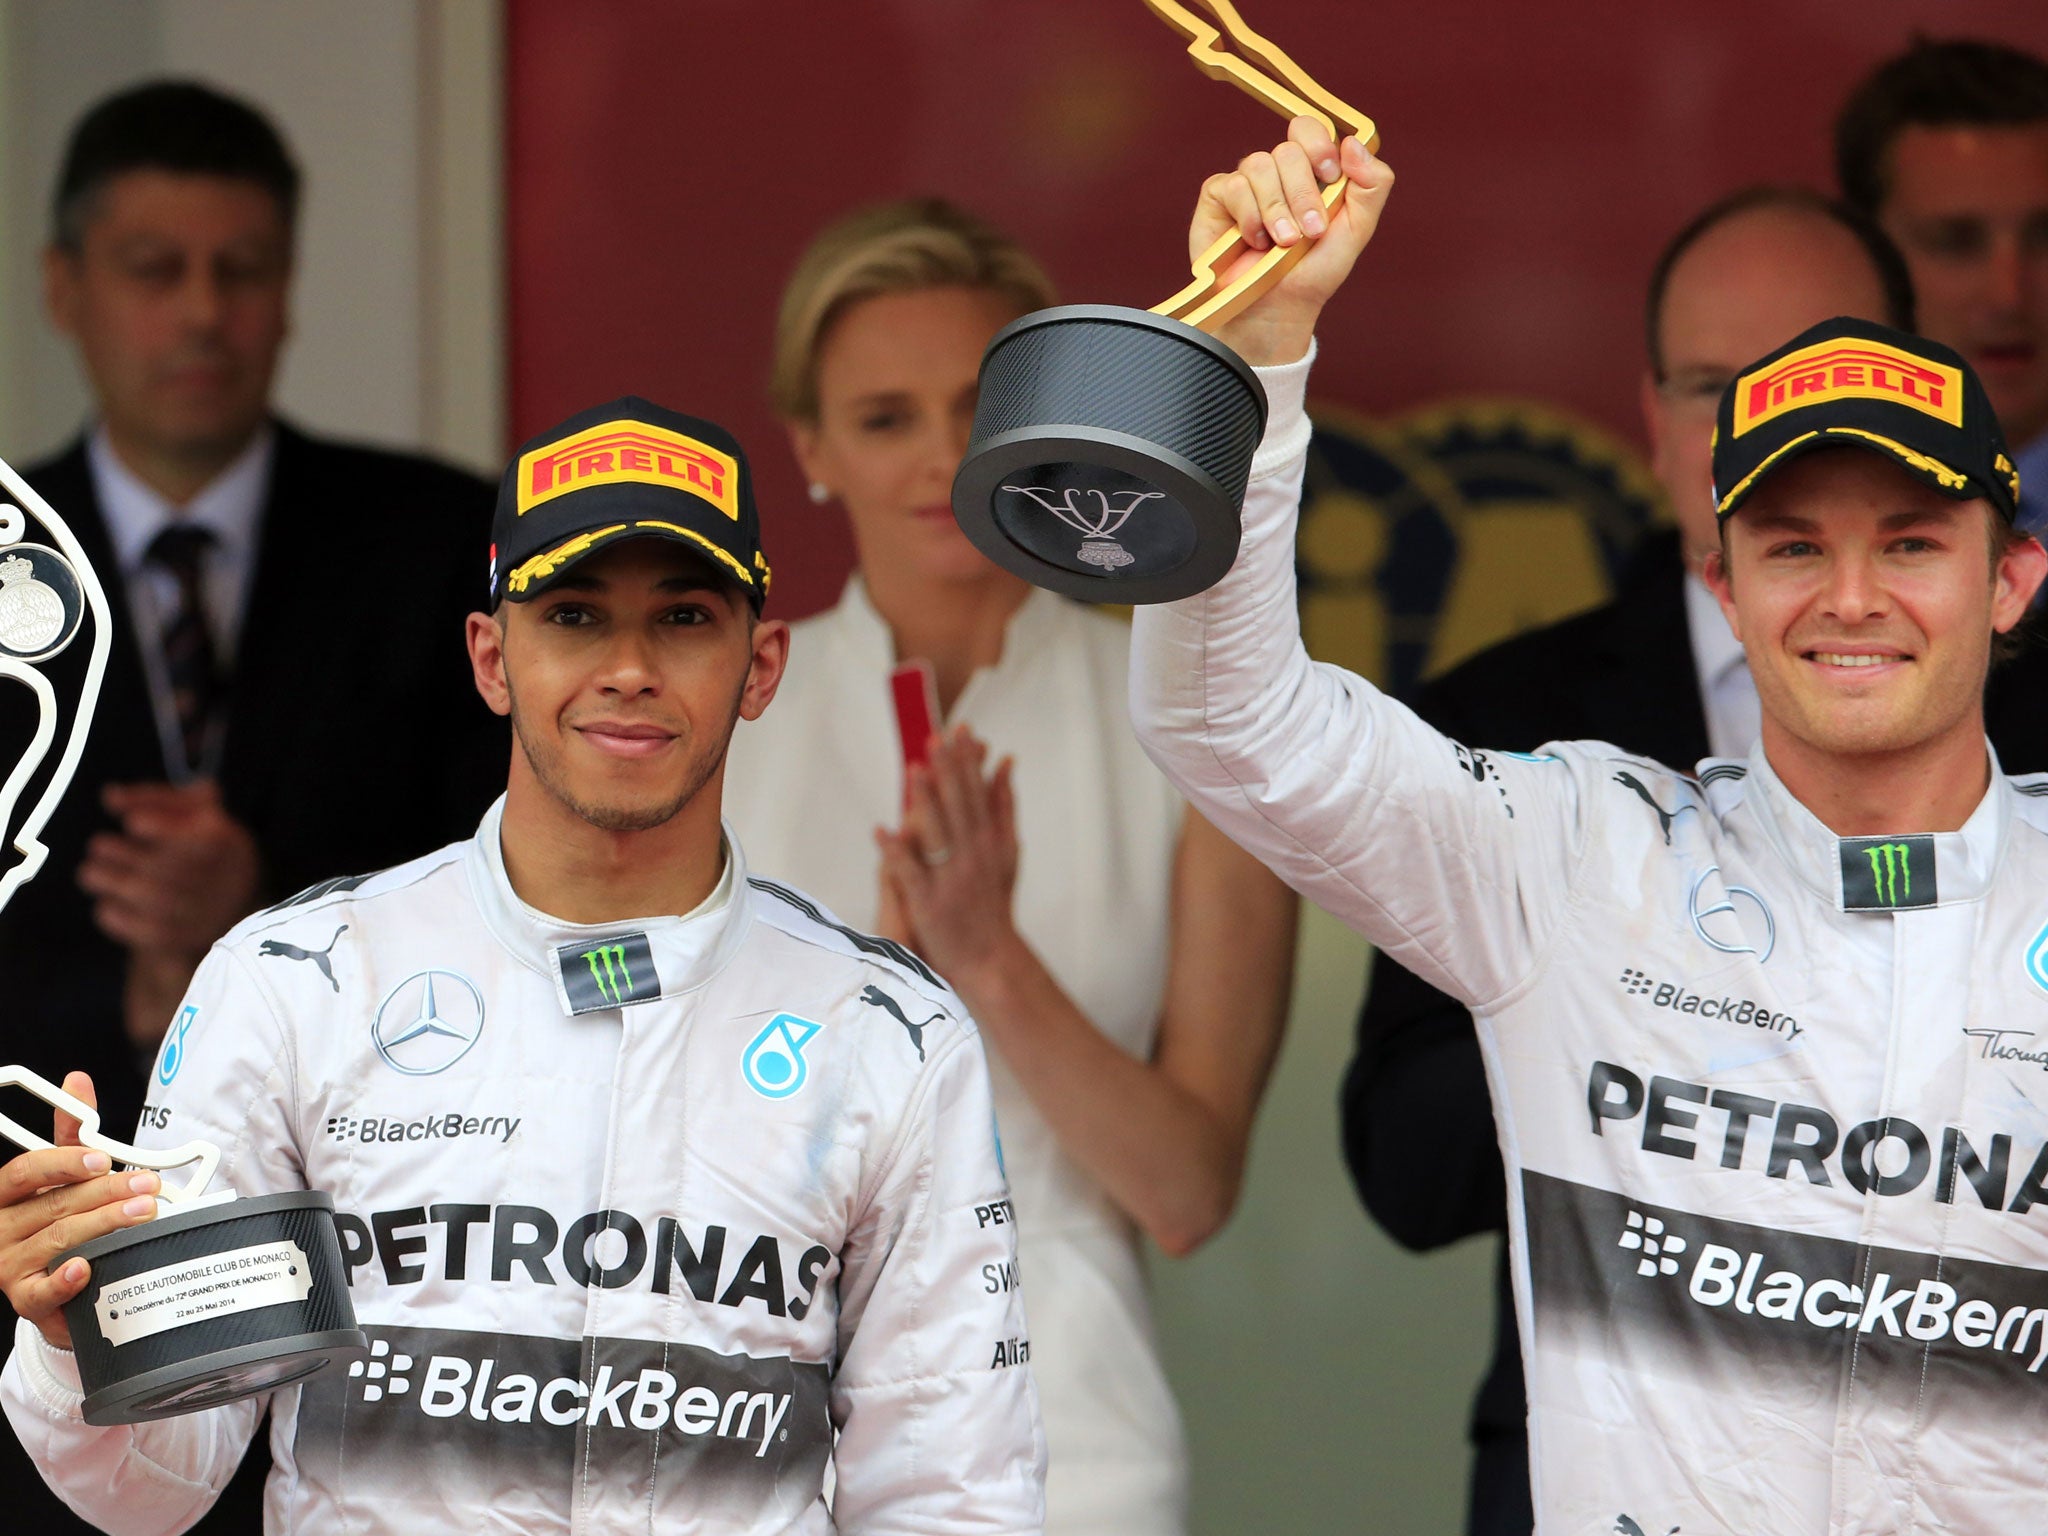 Mercedes' German driver Nico Rosberg (right) holds his trophy next to team-mate Lewis Hamilton (left) on the podium. The pair barely acknowledged each other after the race